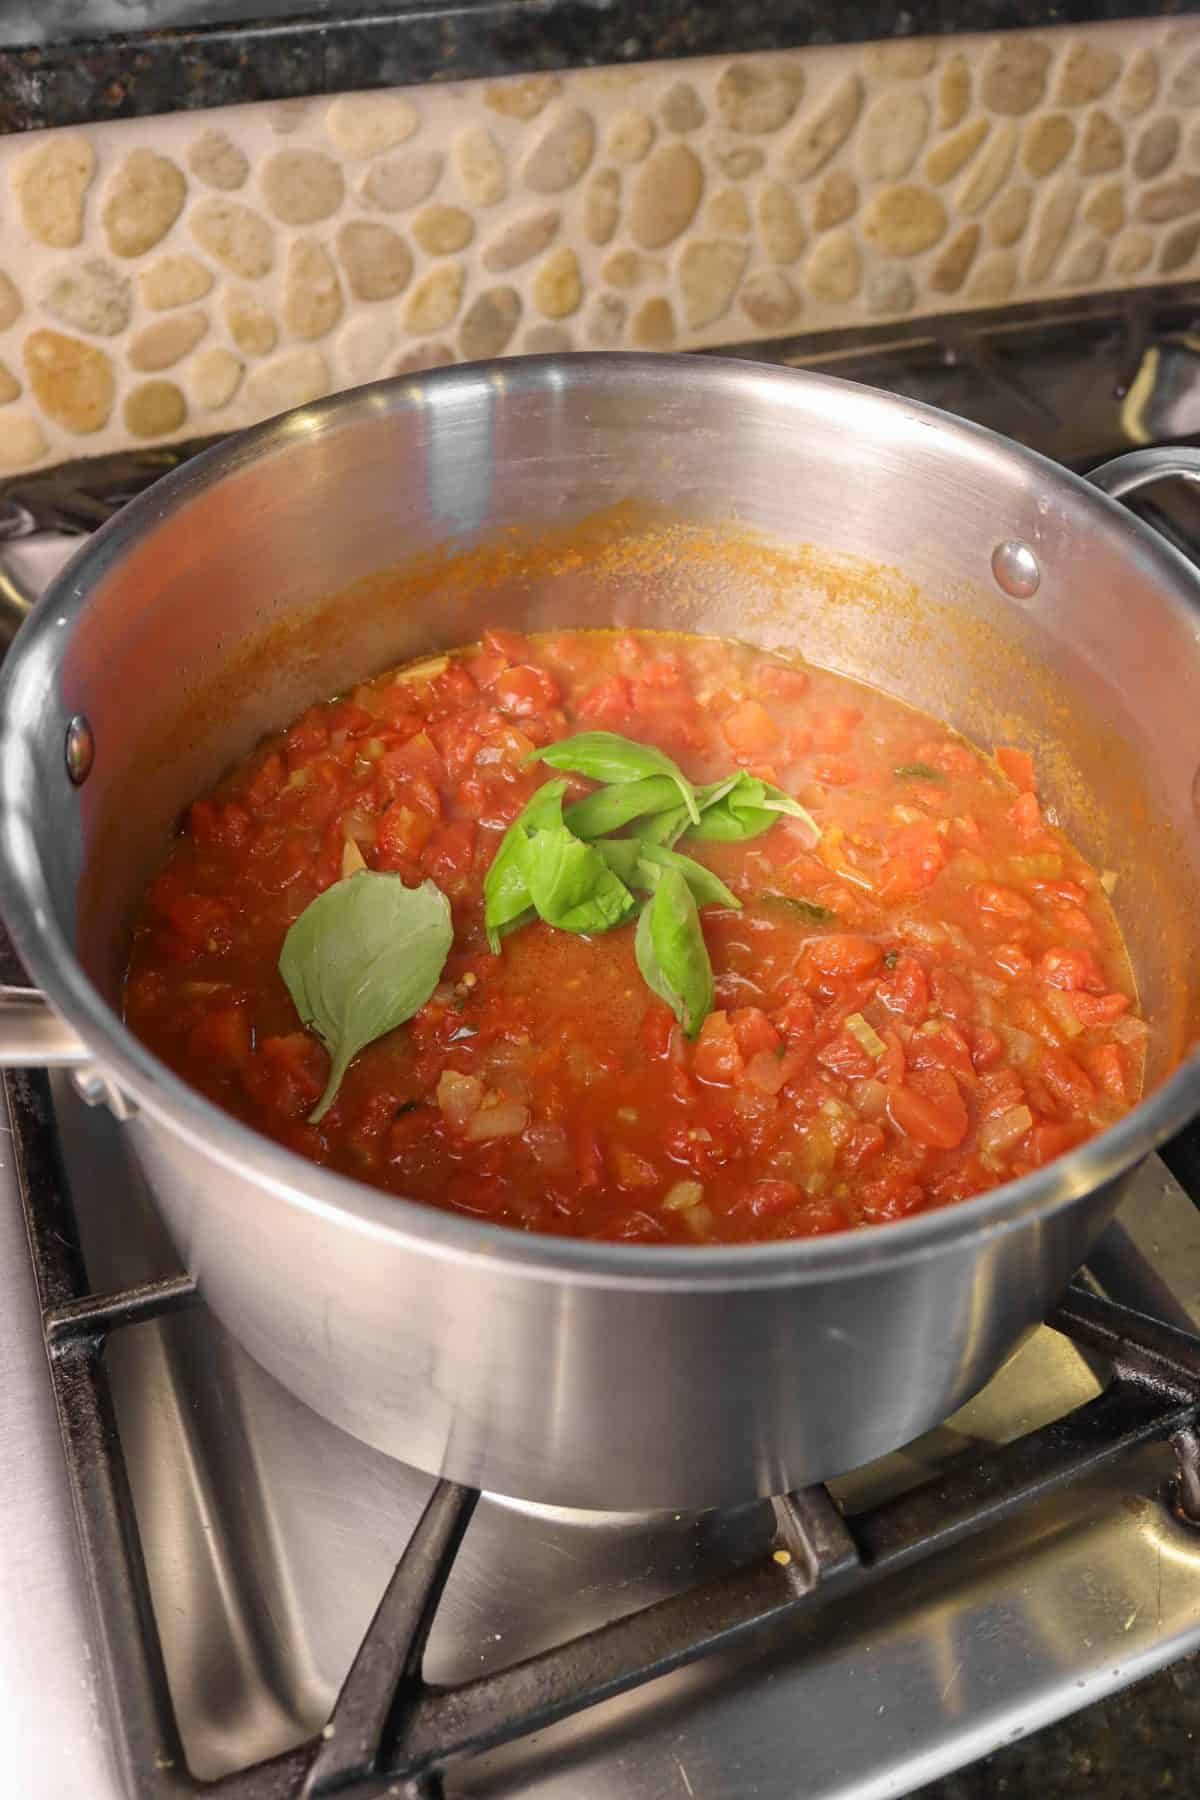 basil added to tomato soup